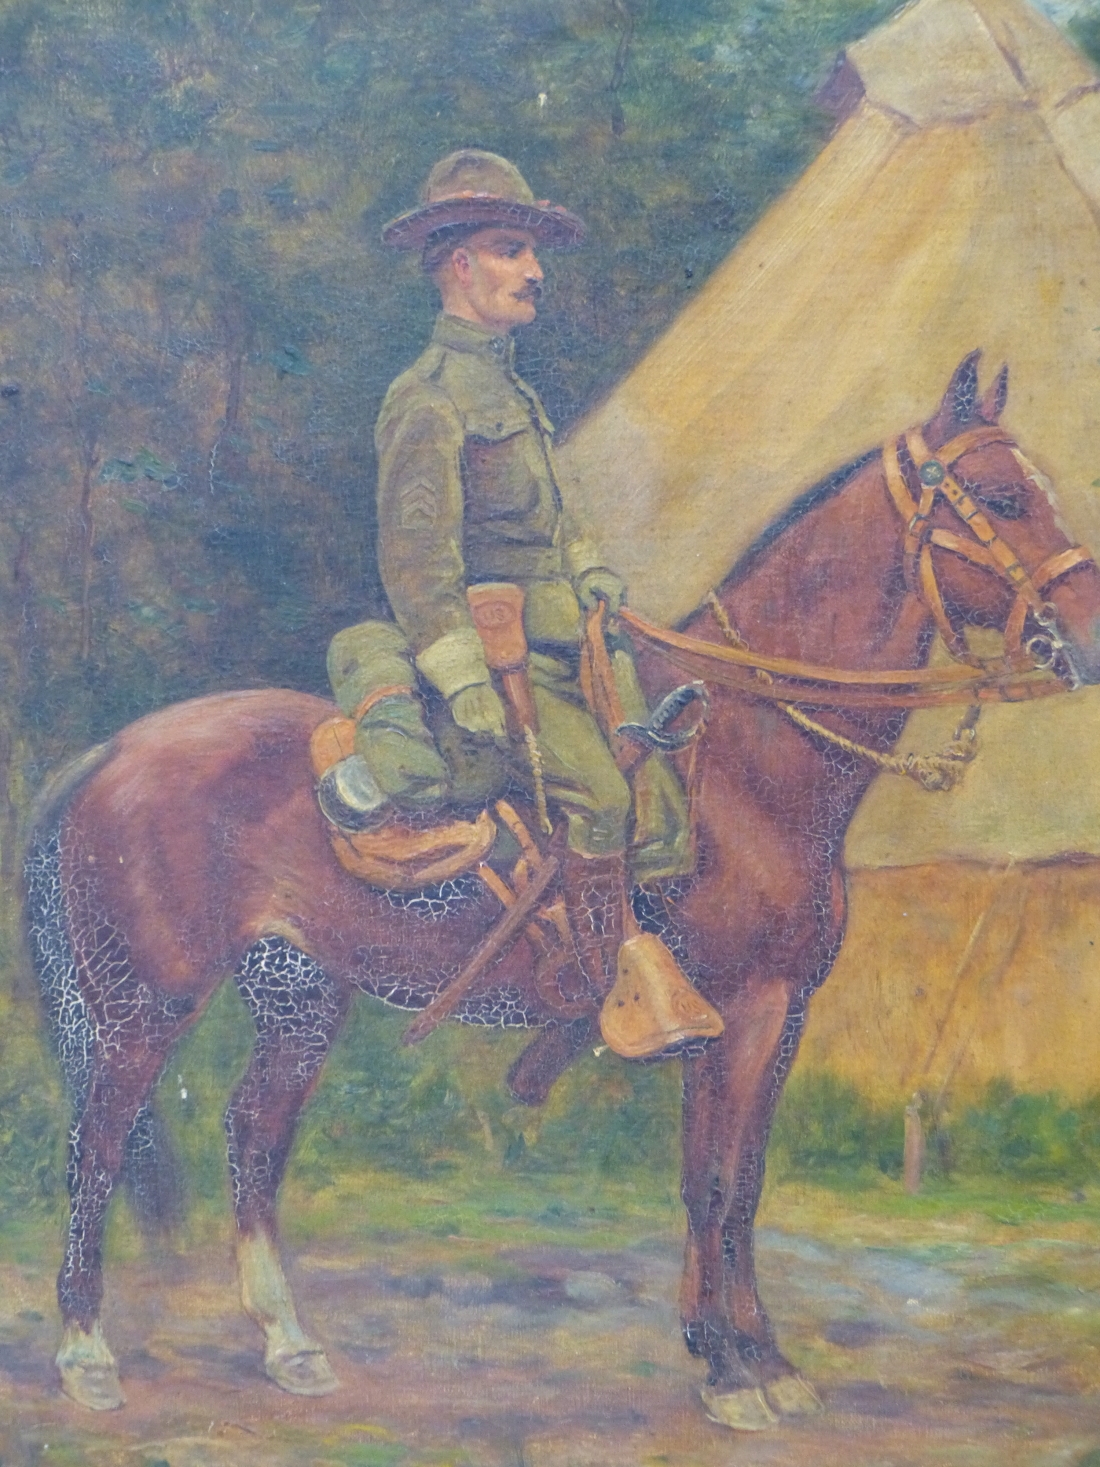 ARR. A UNITED STATES SARGEANT MOUNTED OUTSIDE HIS TENT - Raymond Desvarreux